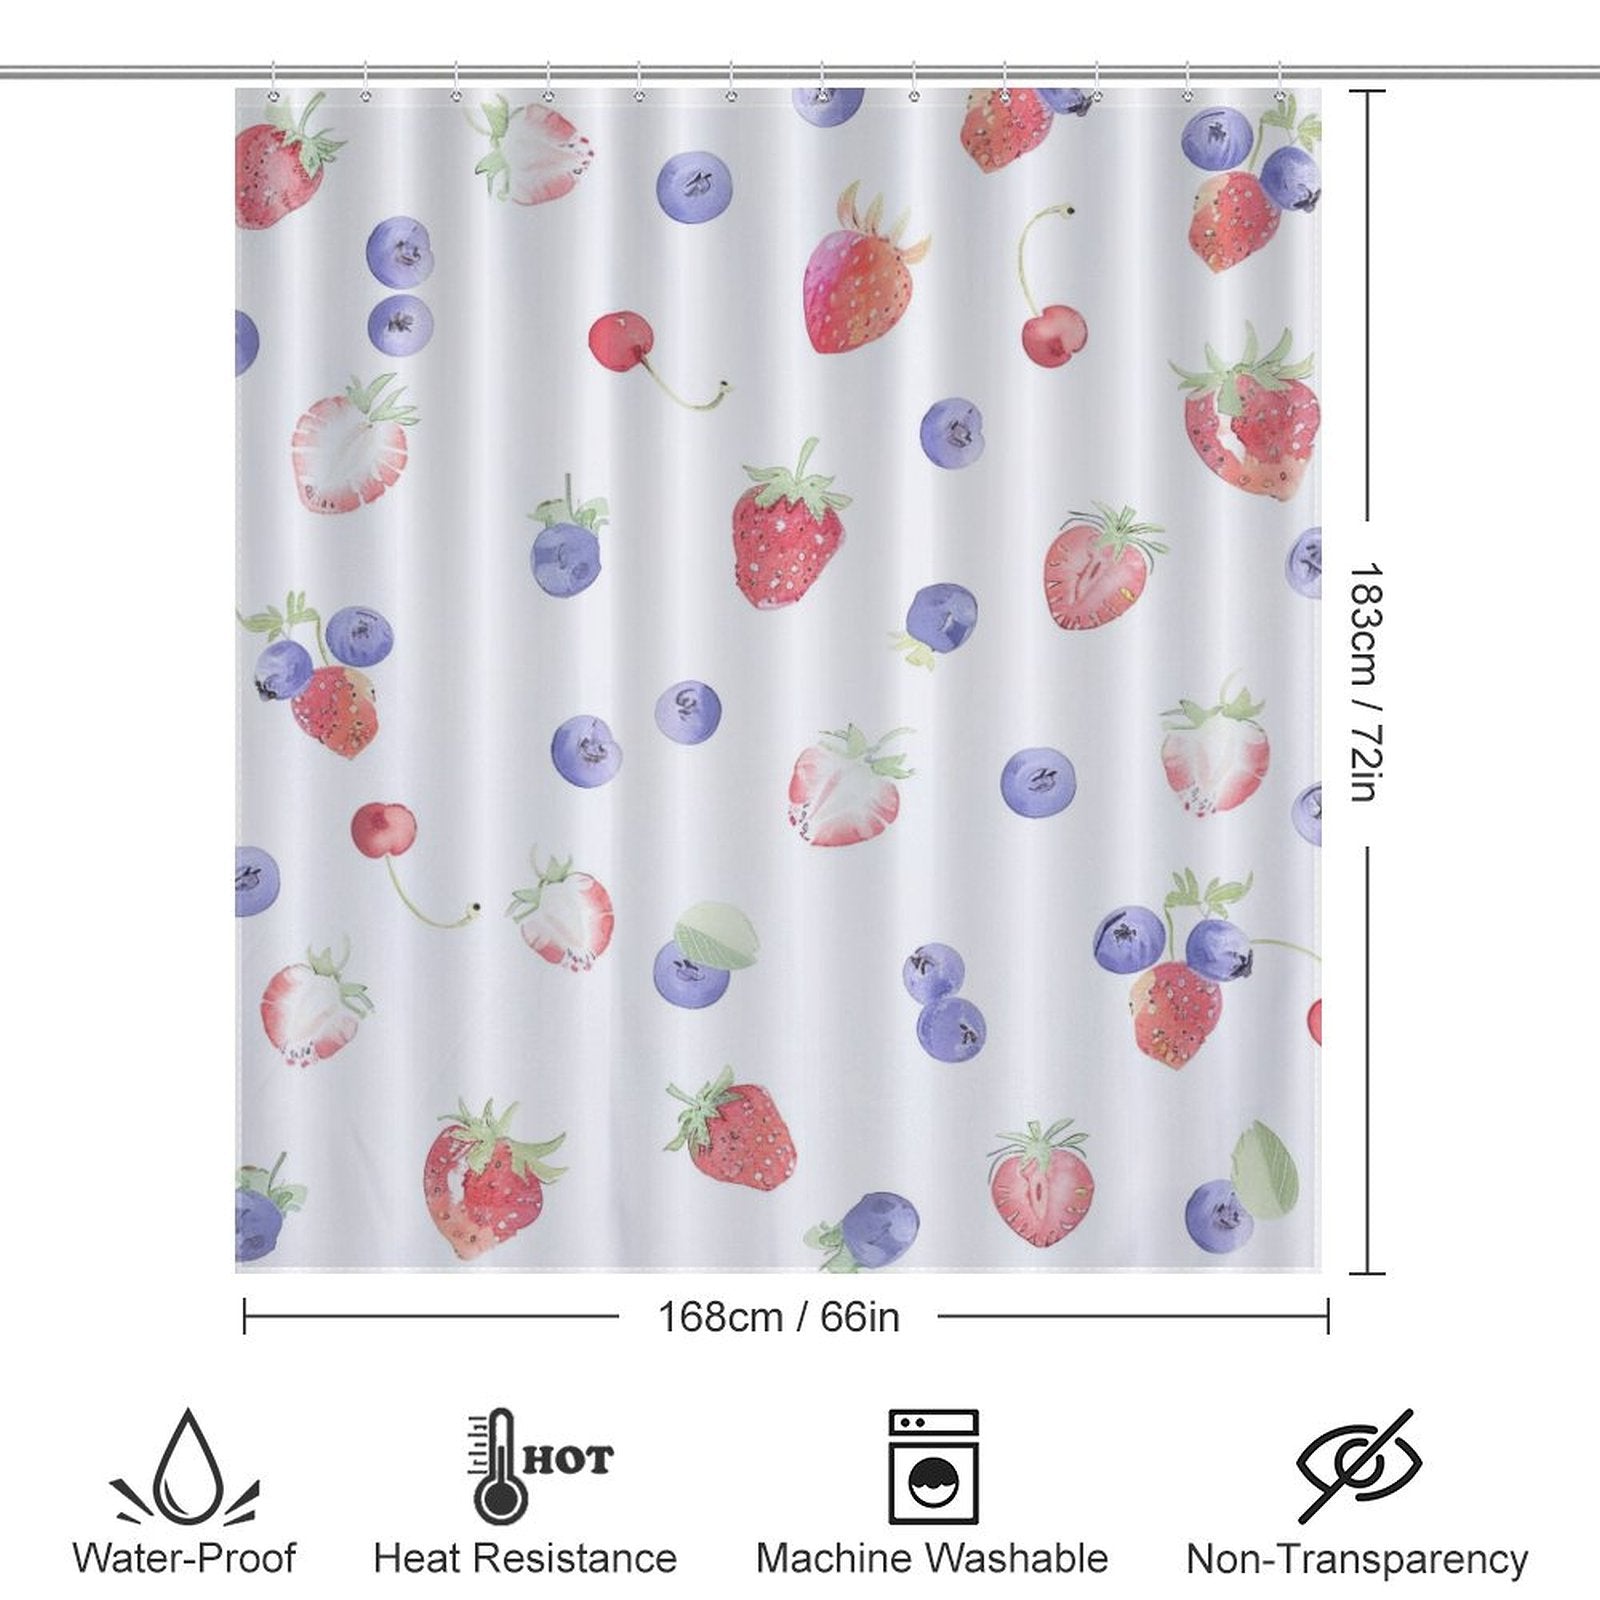 Cute Strawberry and Blueberry Boho Shower Curtain